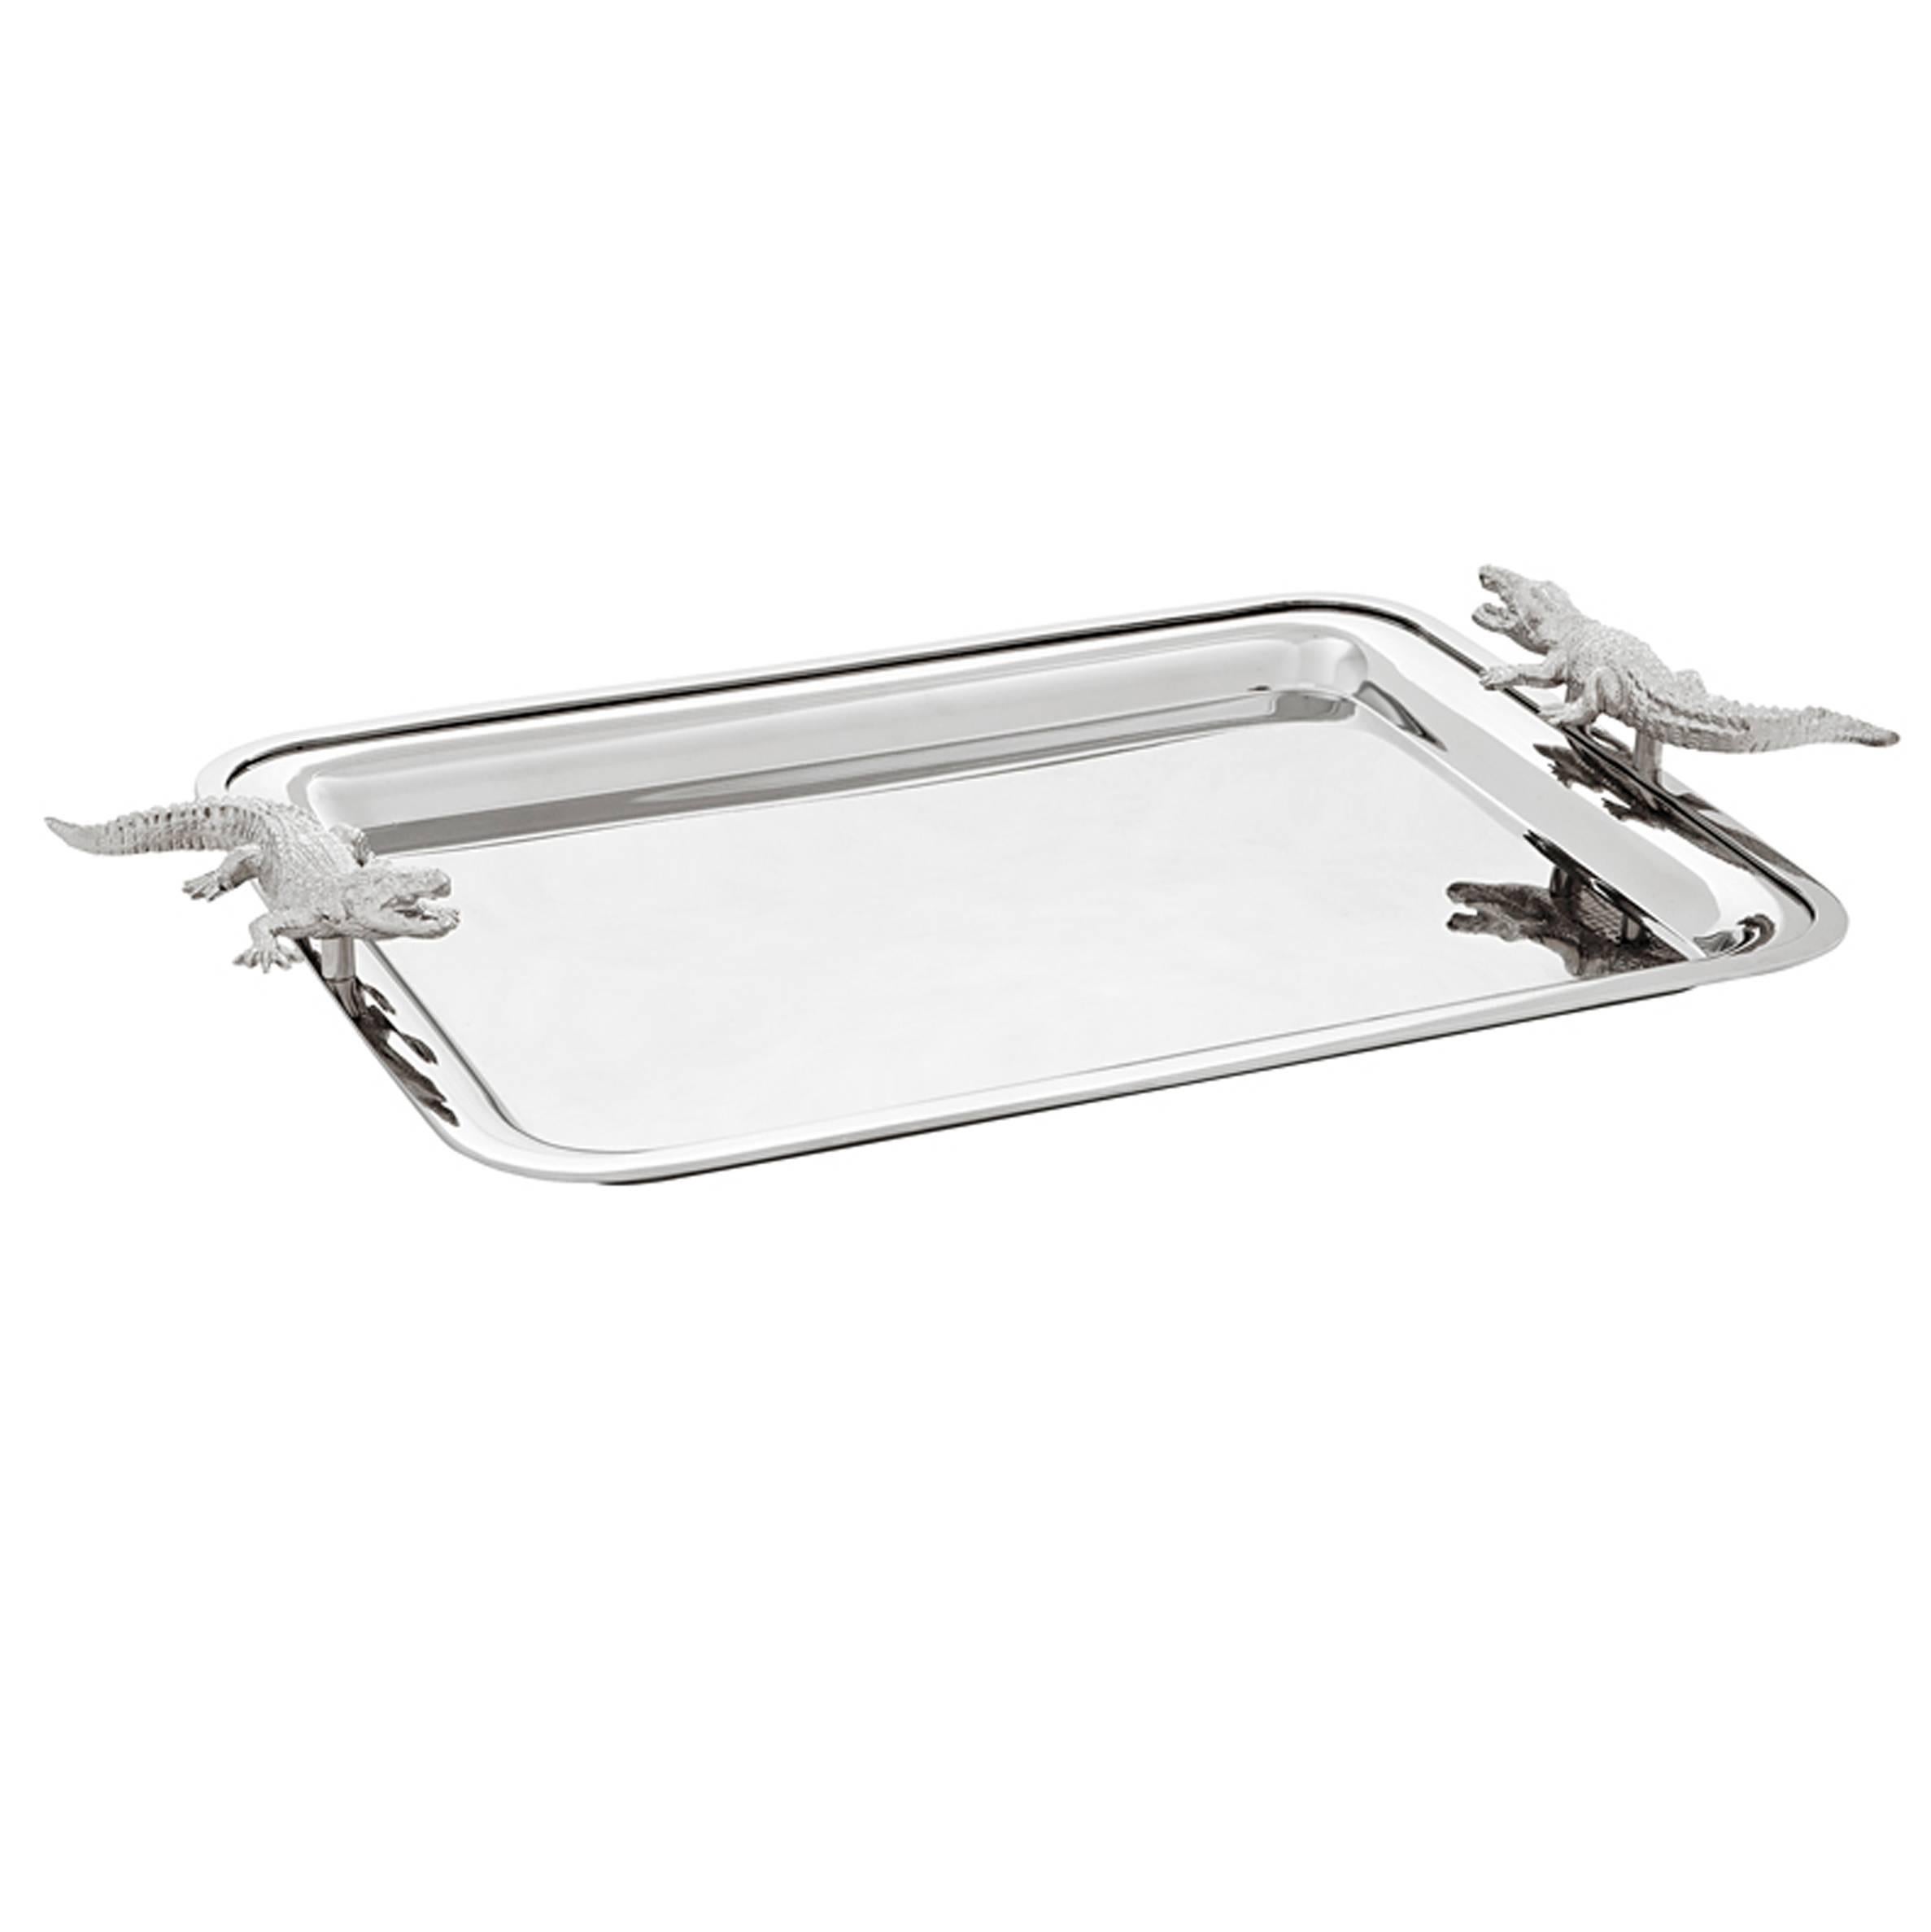 Cayman Tray in Polished Stainless Steel and Nickel